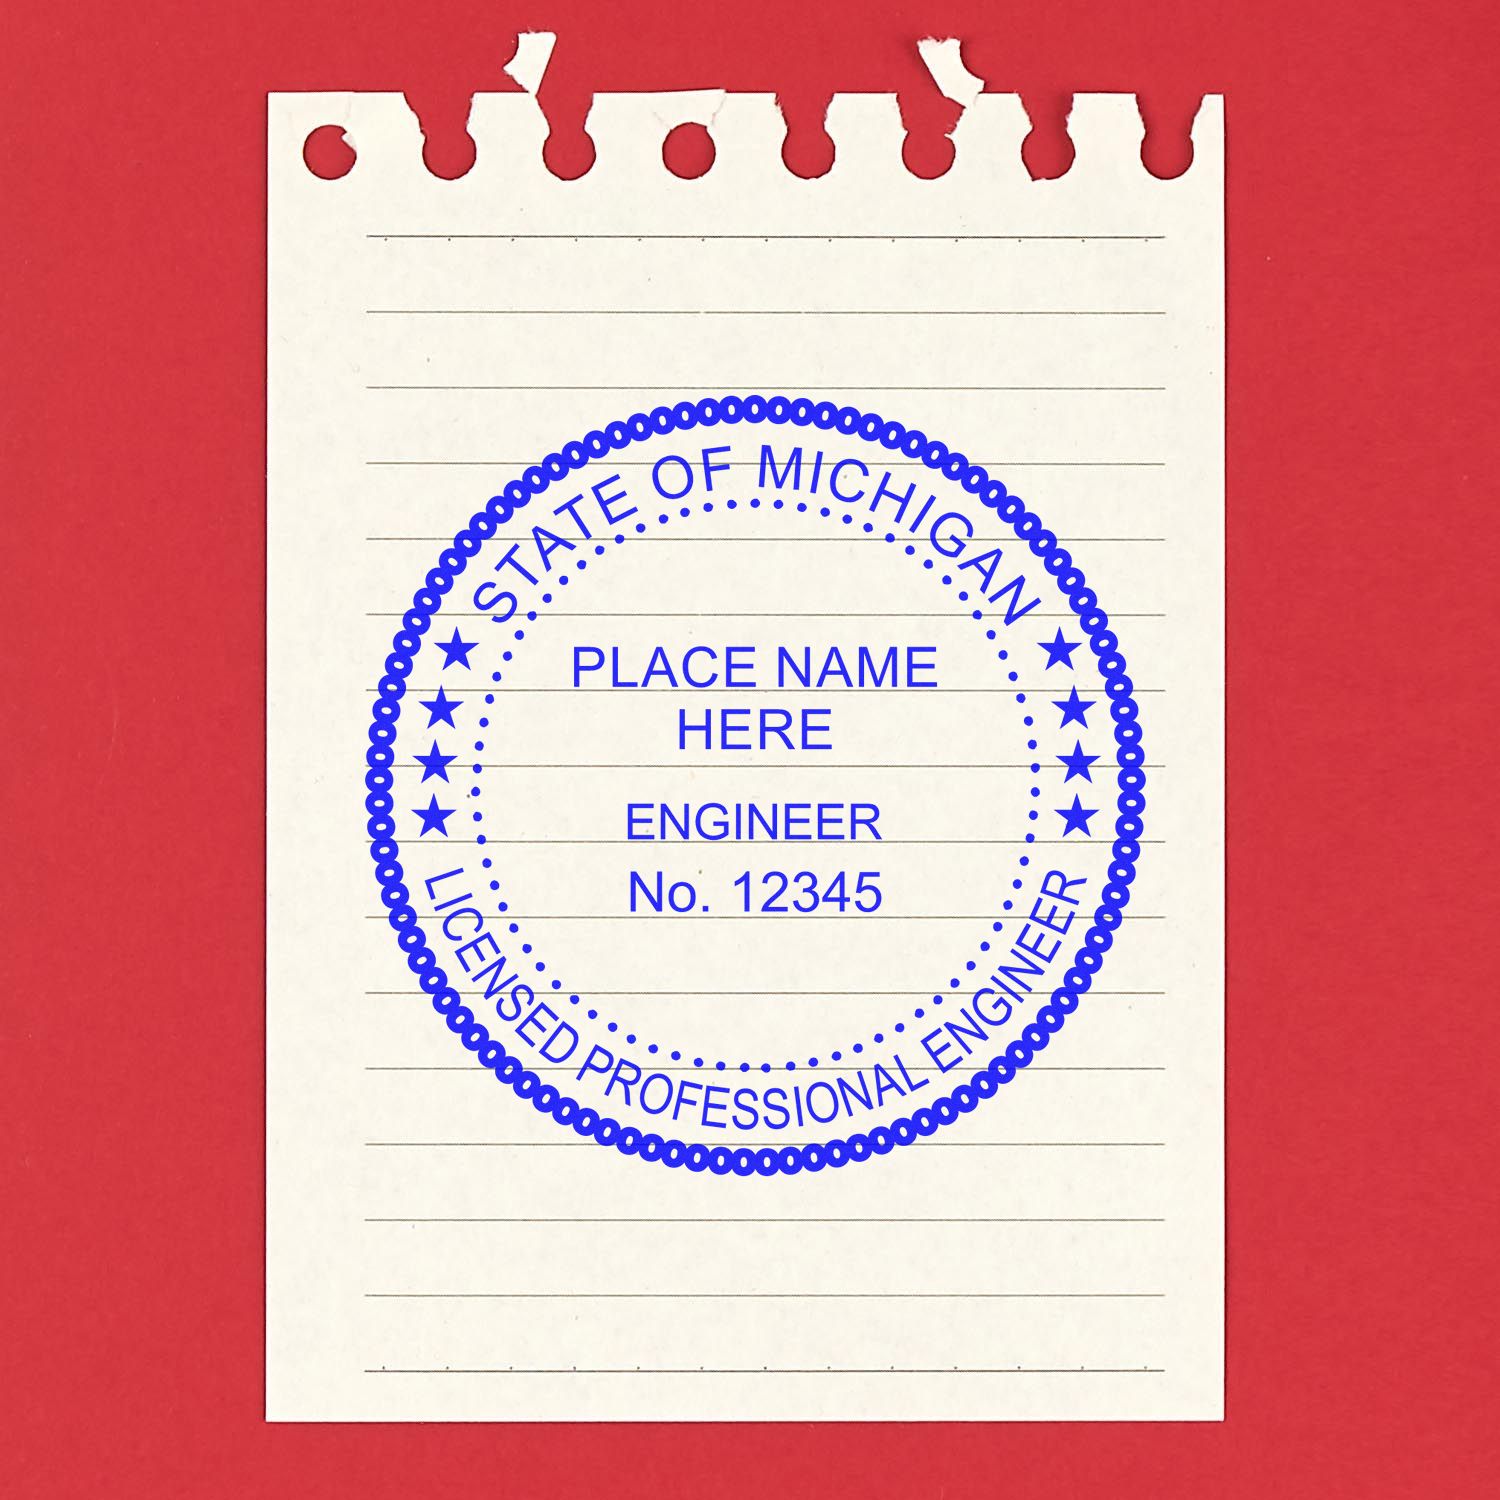 An alternative view of the Michigan Professional Engineer Seal Stamp stamped on a sheet of paper showing the image in use